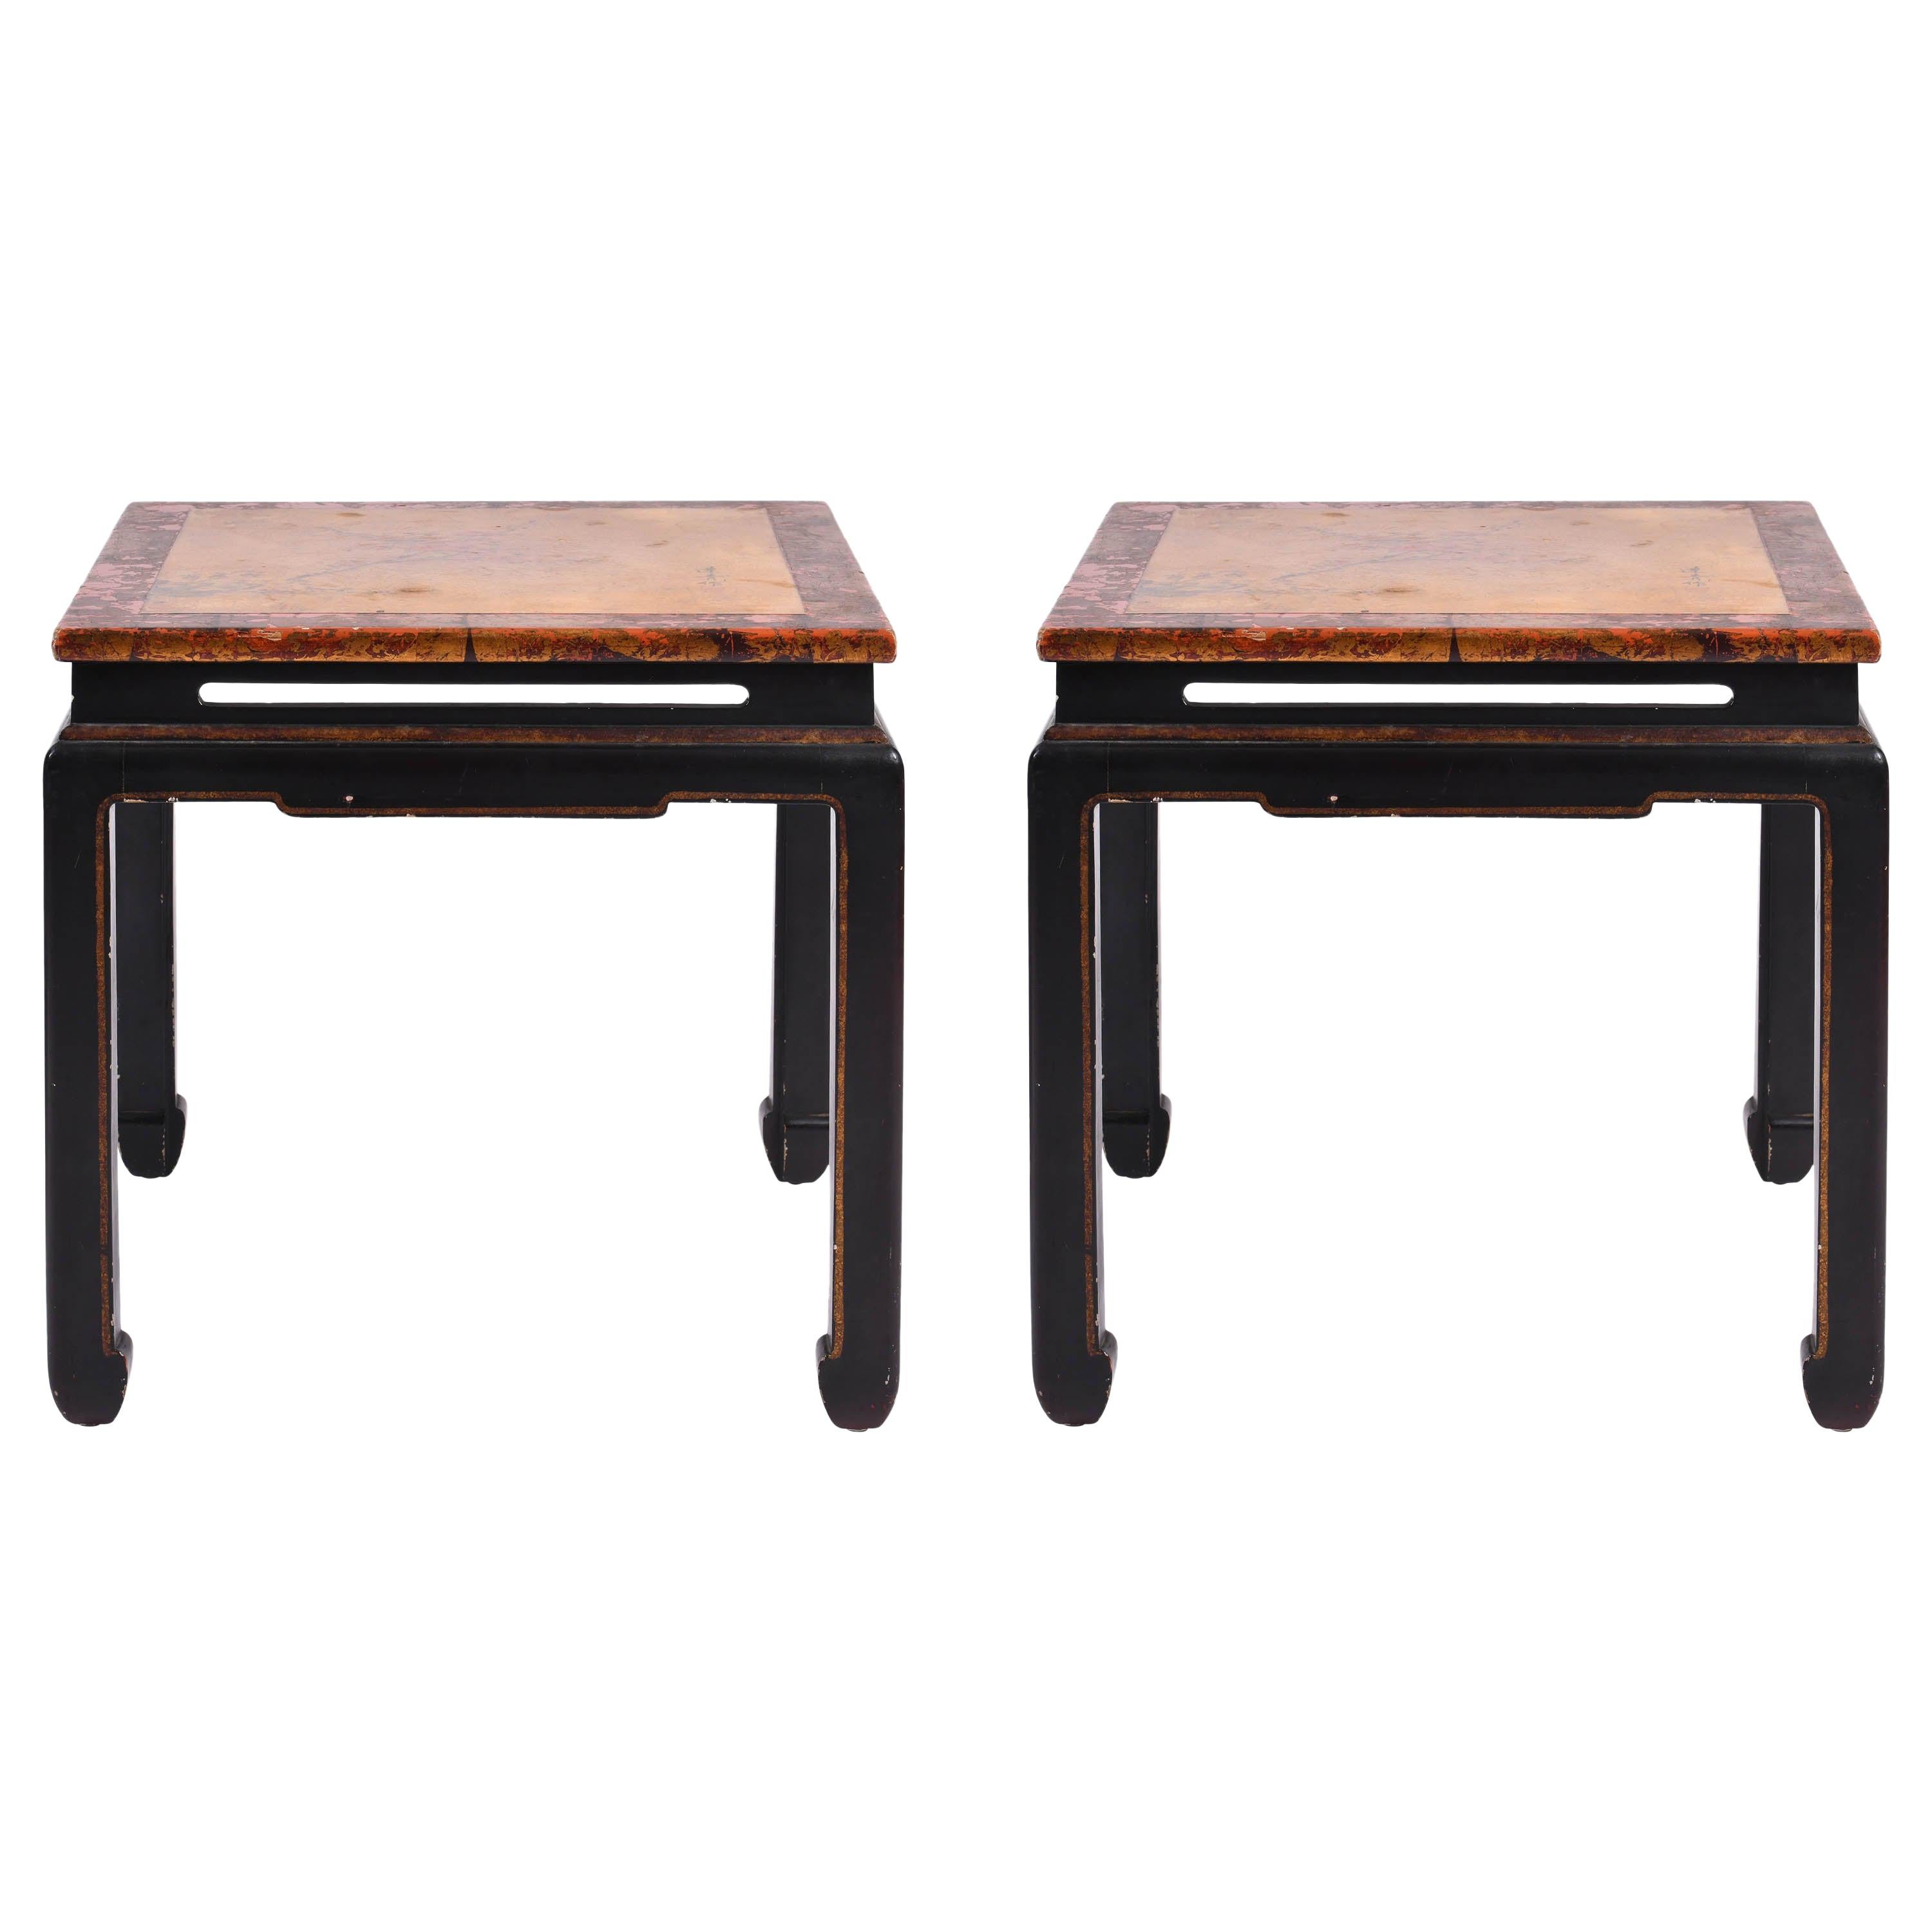 Pair of Chinese Export Black and Red Lacquer Side Tables